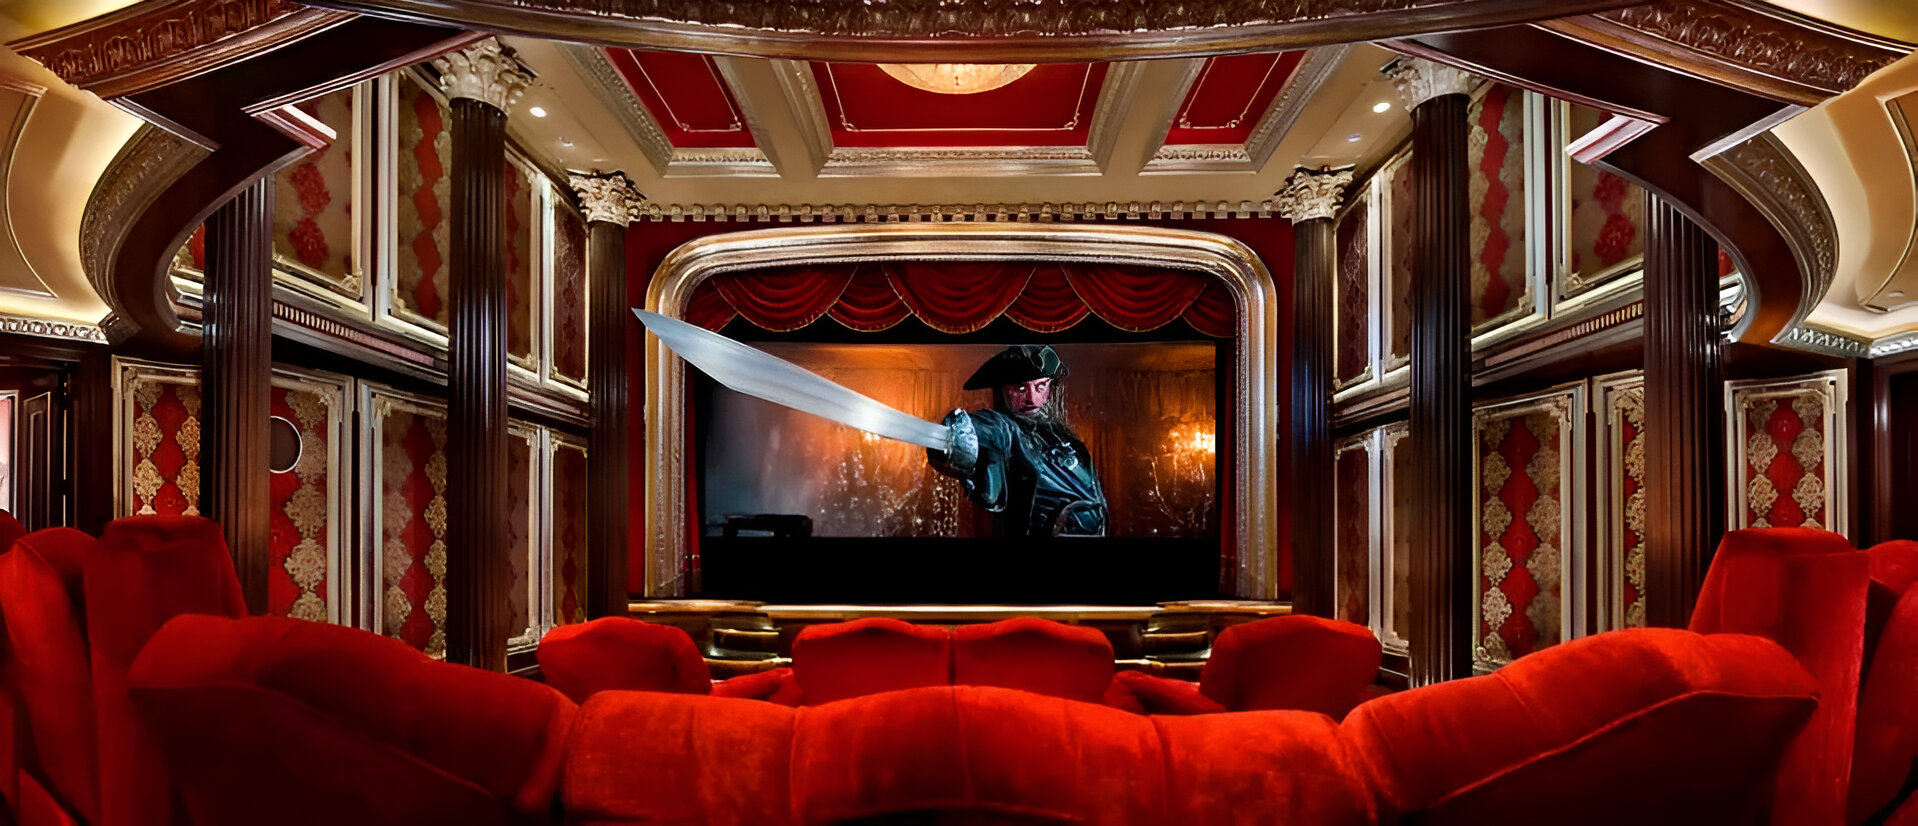 Forbes Magazine: Outrageous Home Theaters Of The Rich And Famous